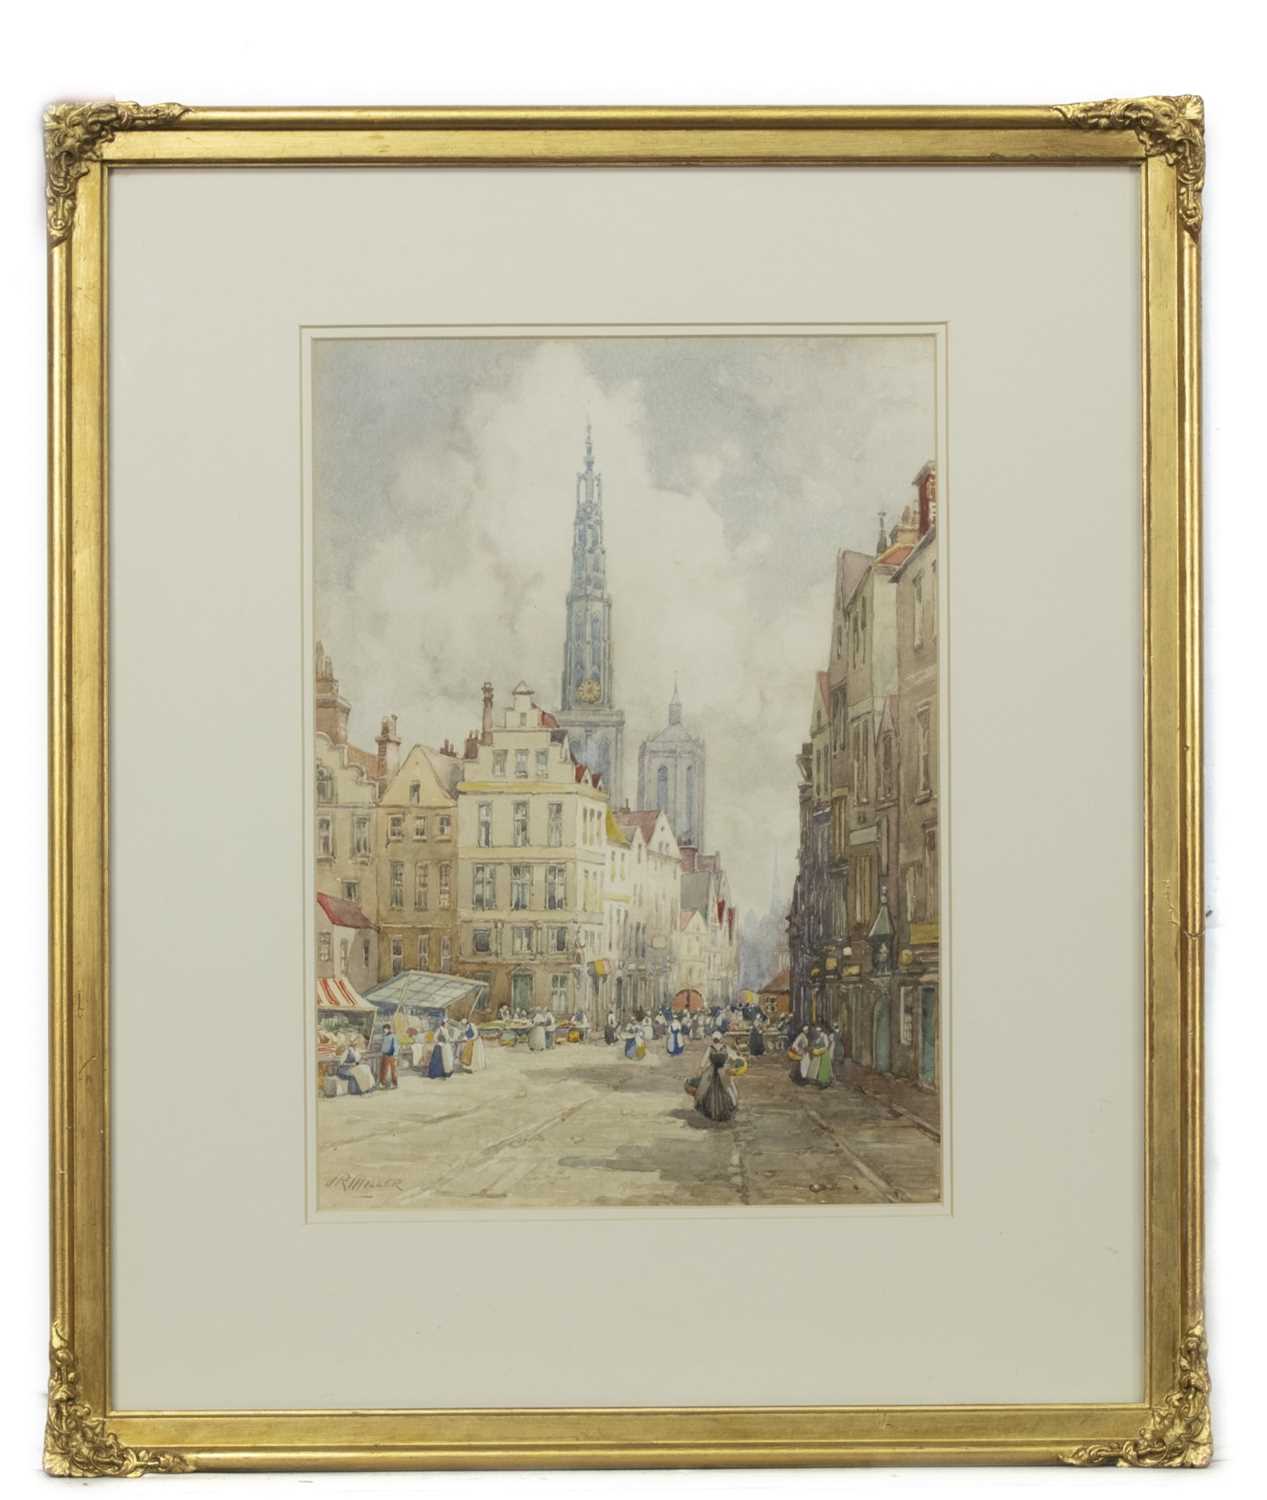 Lot 477 - ANTWERP CATHEDRAL OF OUR LADY, A WATERCOLOUR BY J R MILLER